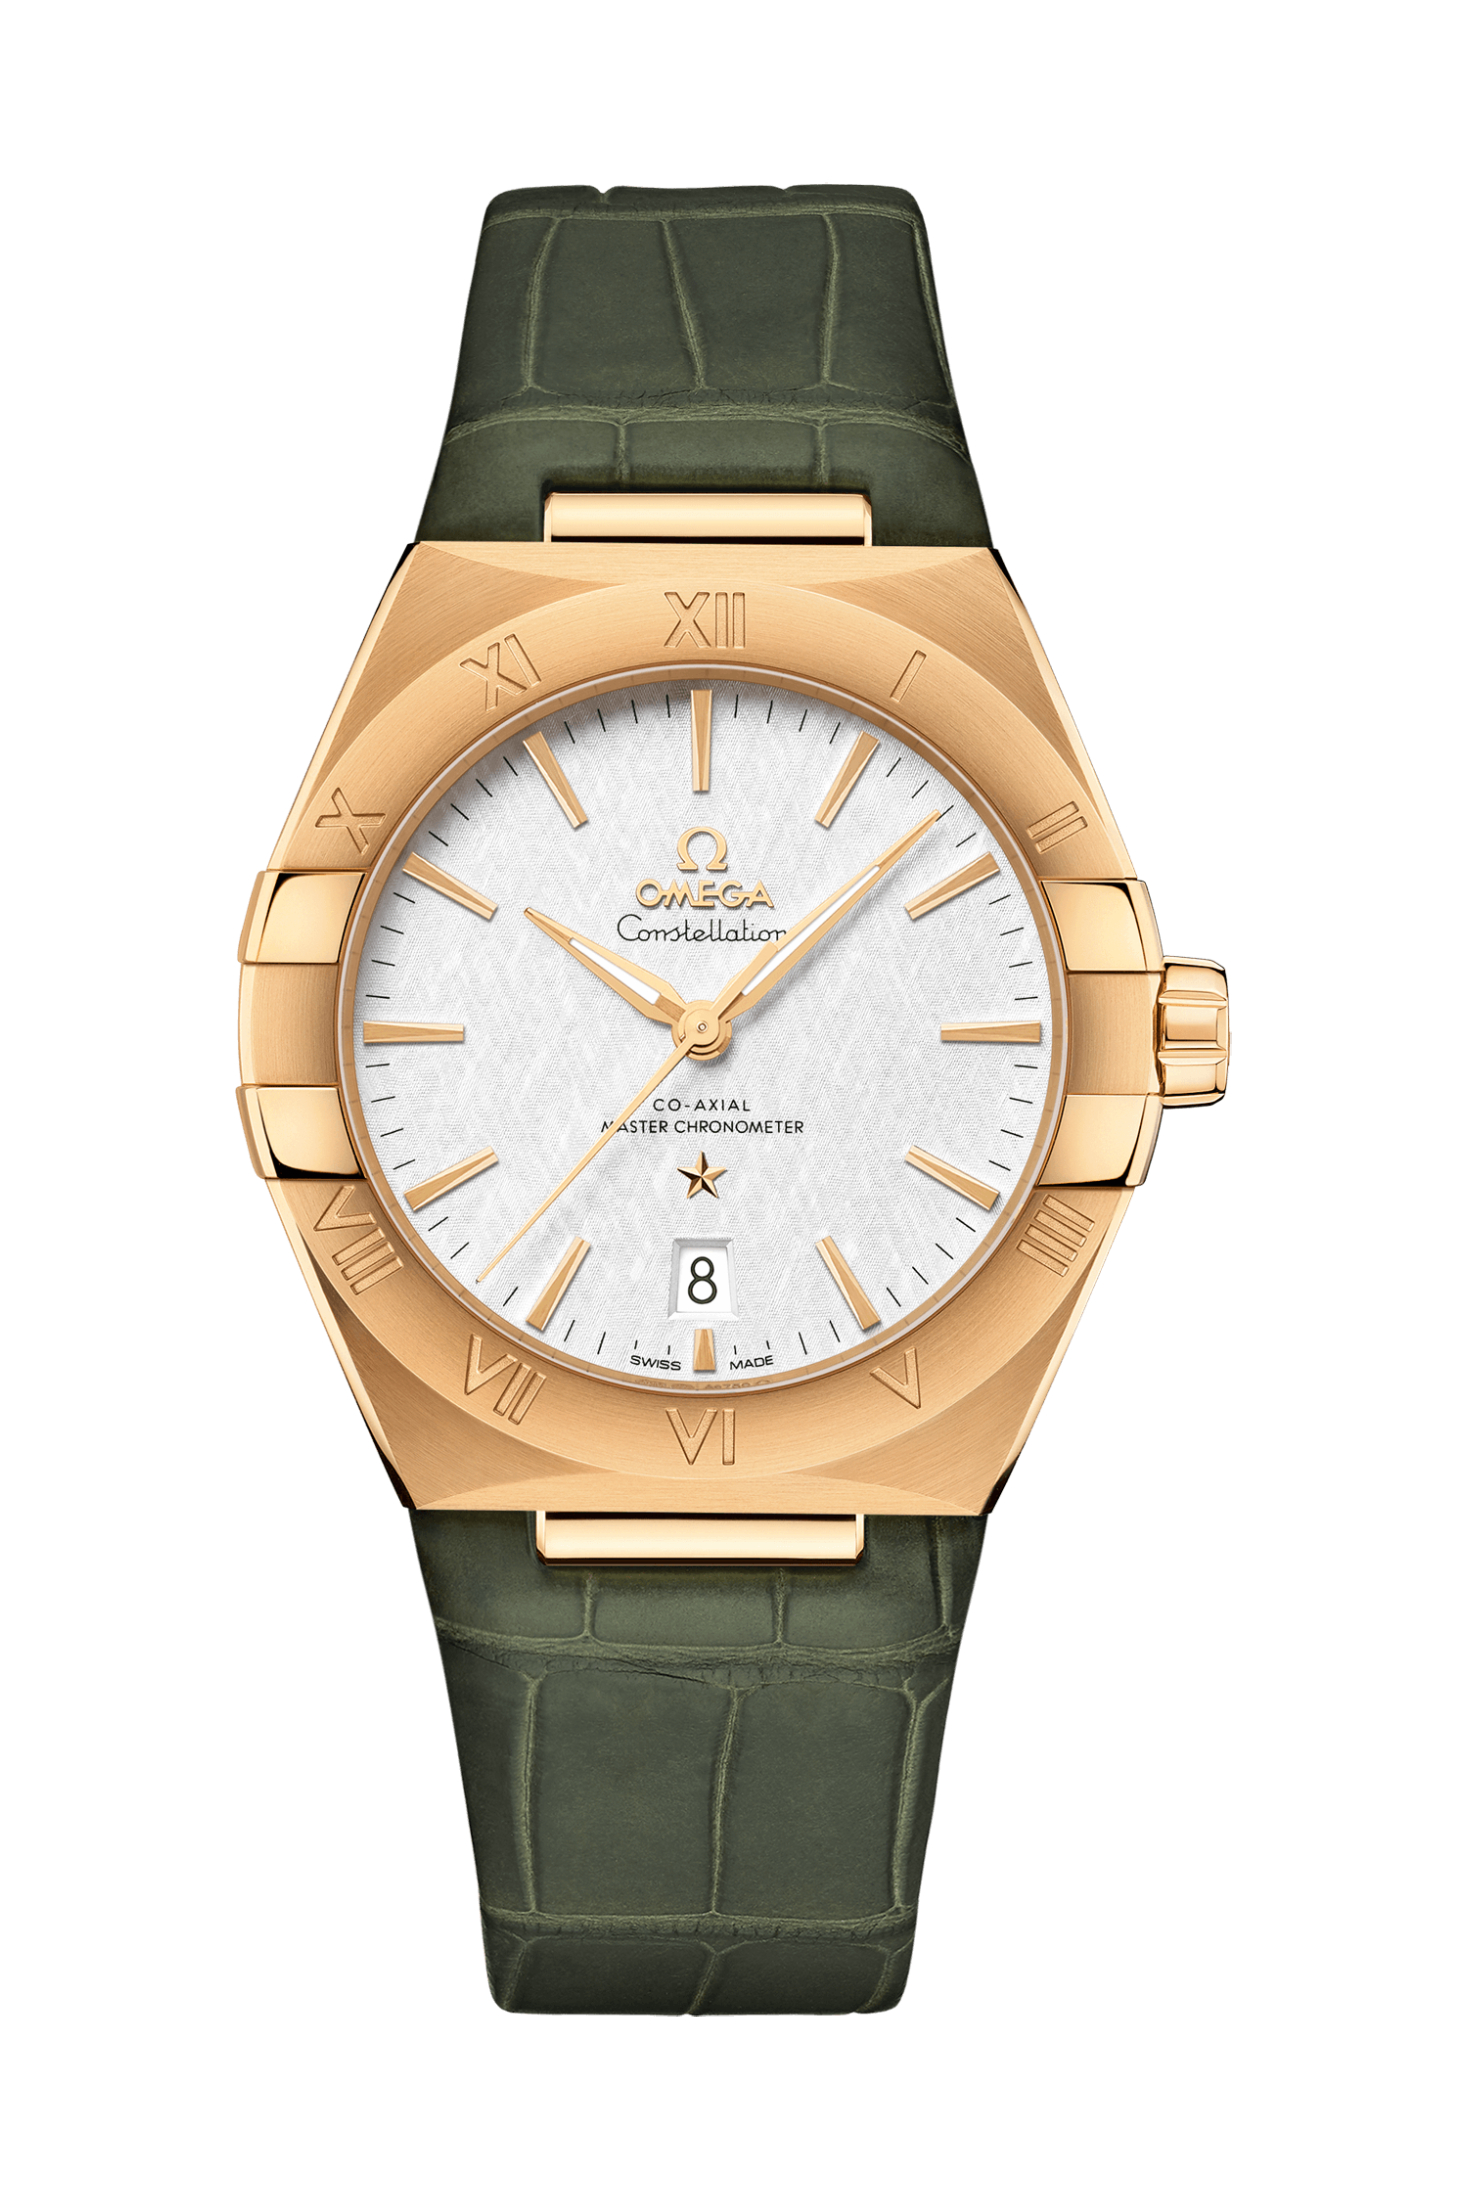 Men's watch / unisex  OMEGA, Constellation Co Axial Master Chronometer / 39mm, SKU: 131.53.39.20.02.002 | watchapproach.com